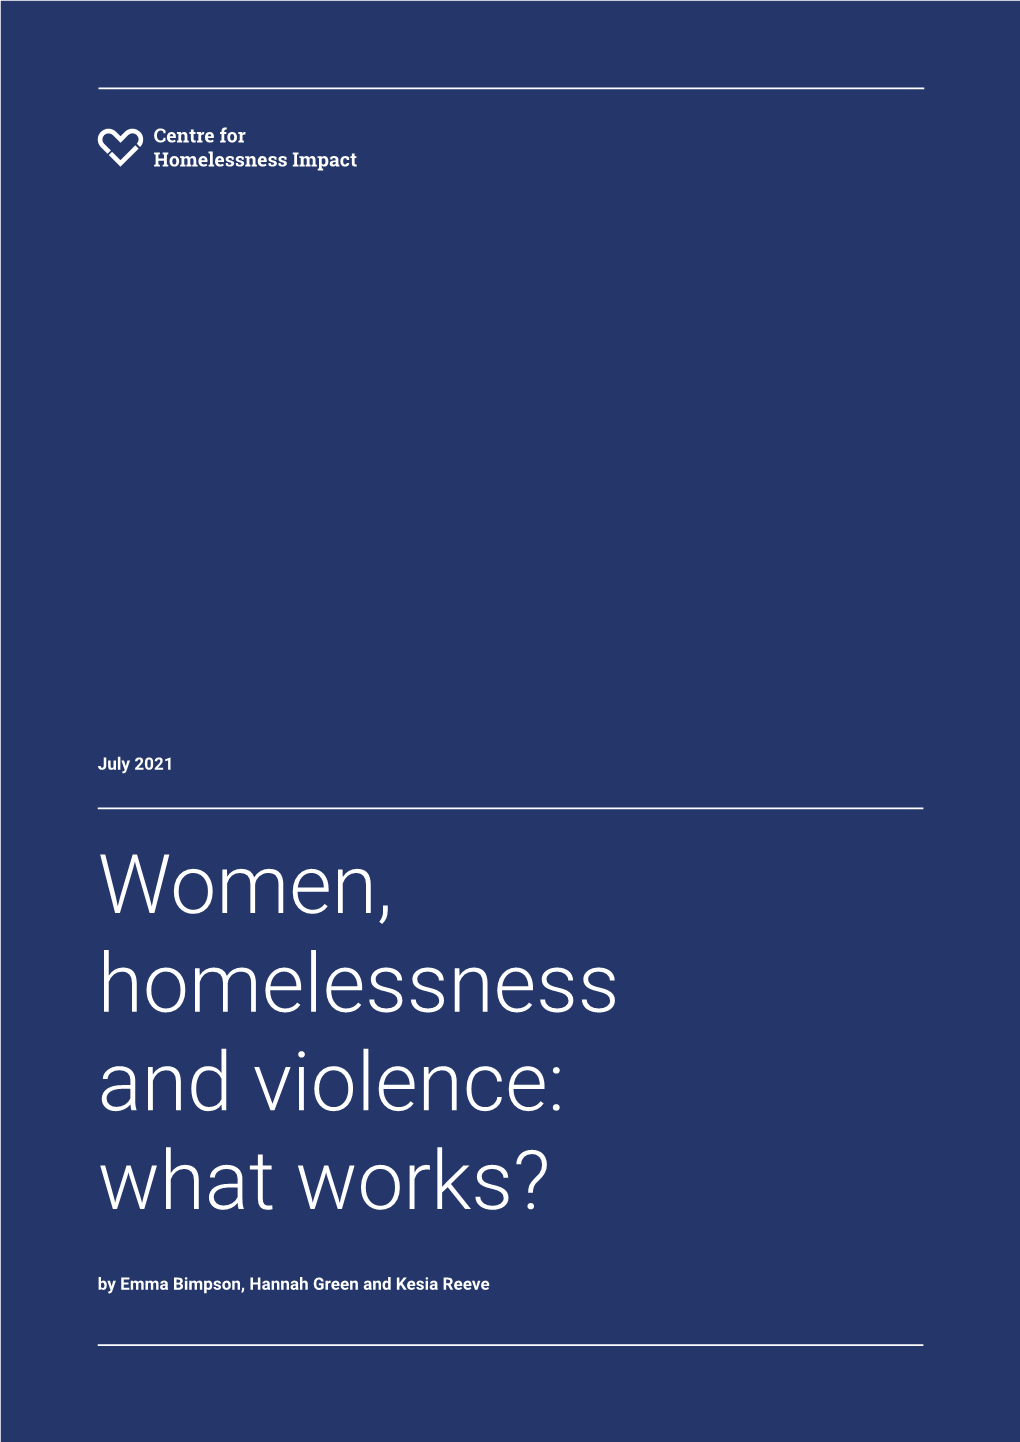 Women, Homelessness and Violence: What Works? by Emma Bimpson, Hannah Green and Kesia Reeve July 2021